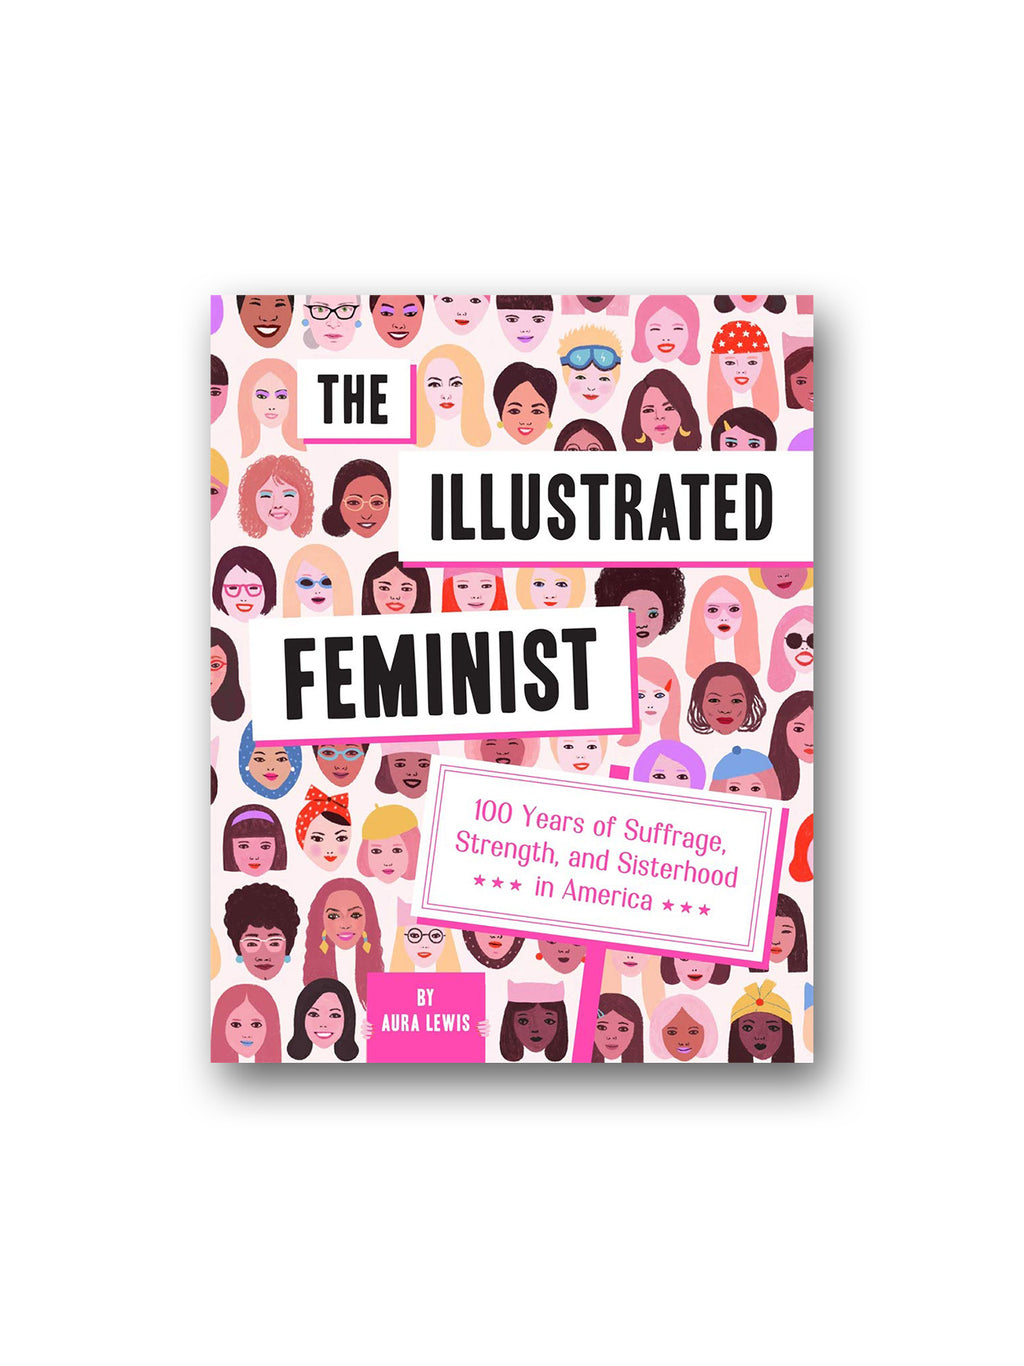 The Illustrated Feminist : 100 Years of Suffrage, Strength, and Sisterhood in America